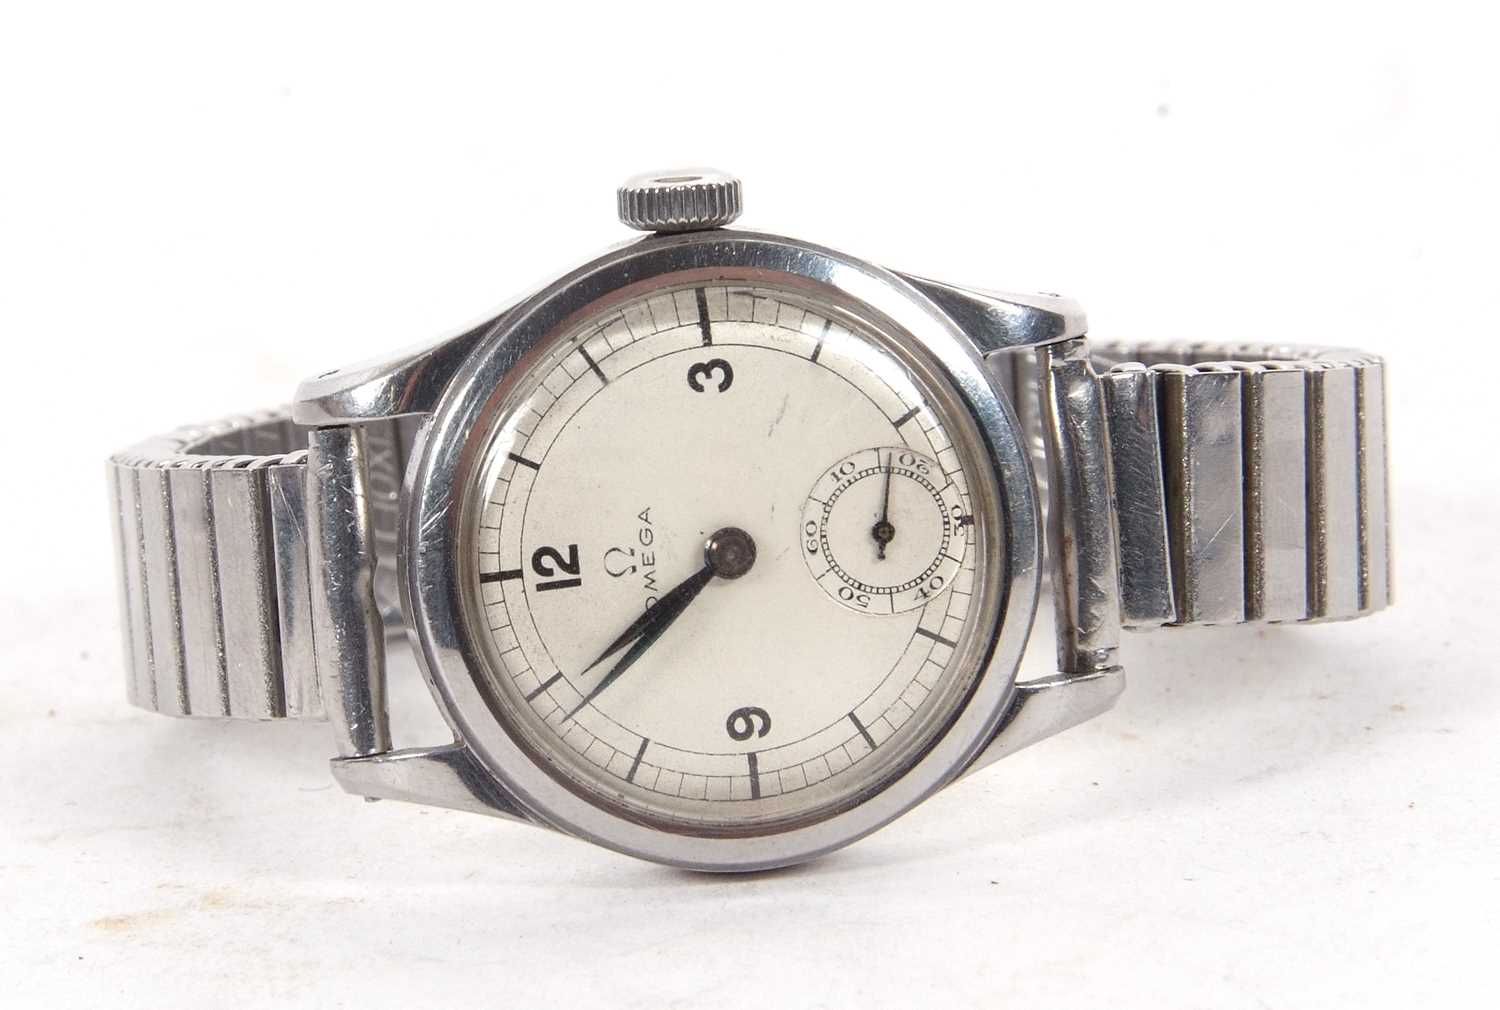 A stainless steel cased Omega gents wristwatch, circa 1930, it has a manually crown wound